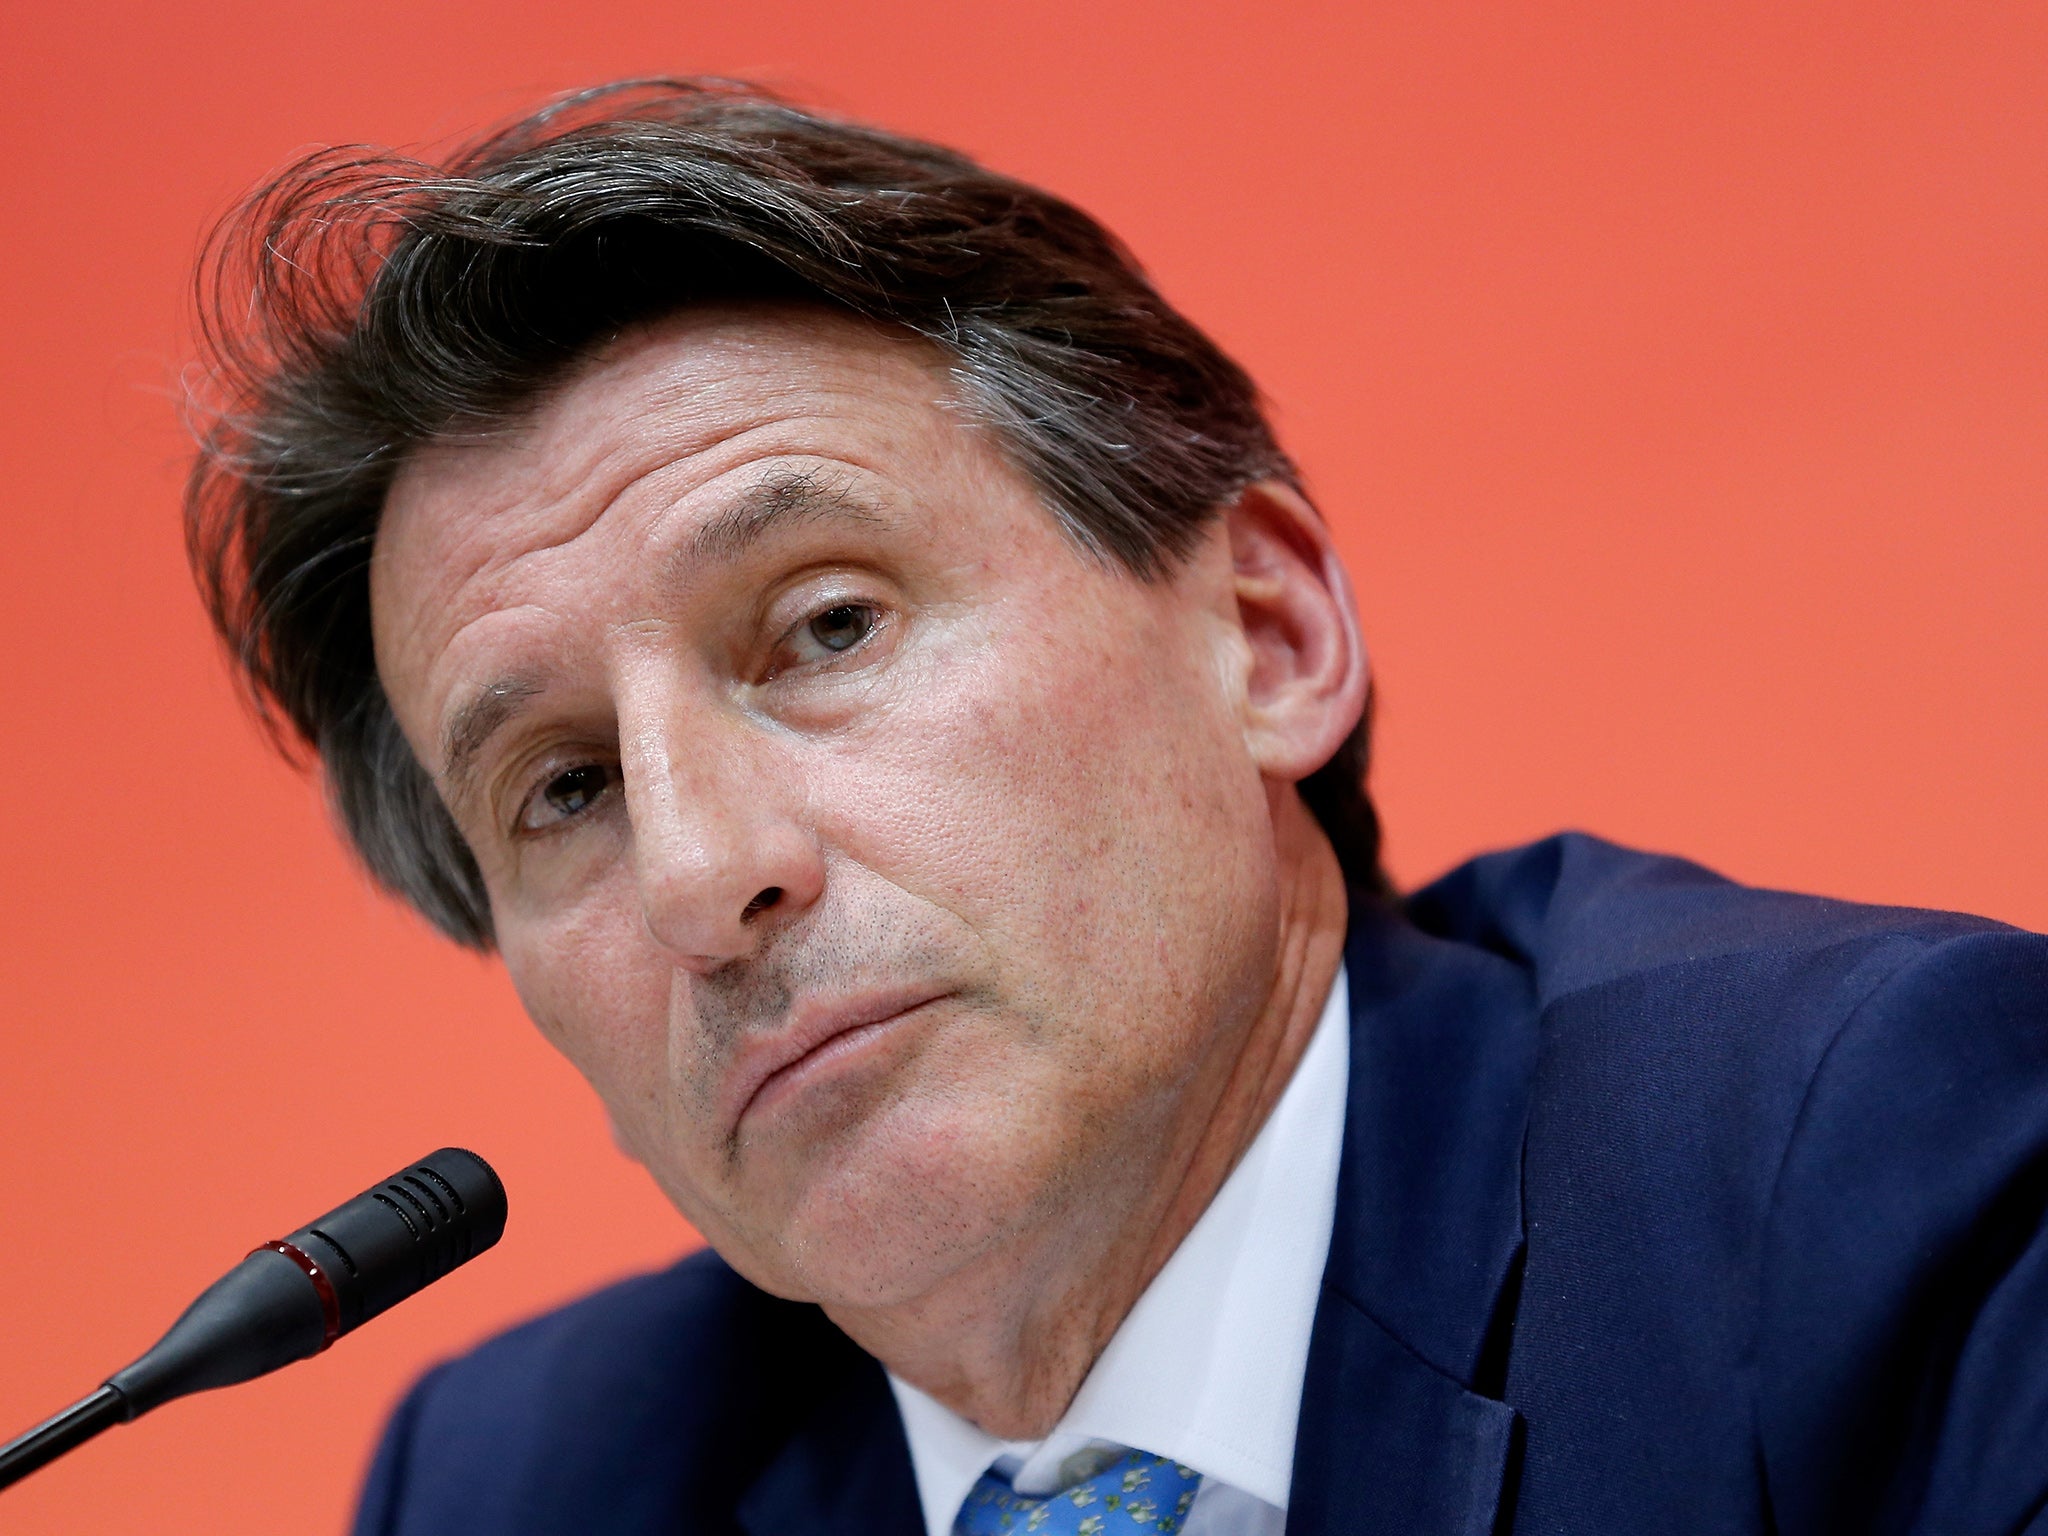 IAAF president Sebastian Coe has given no assurances they will be eligible to compete at the Olympics